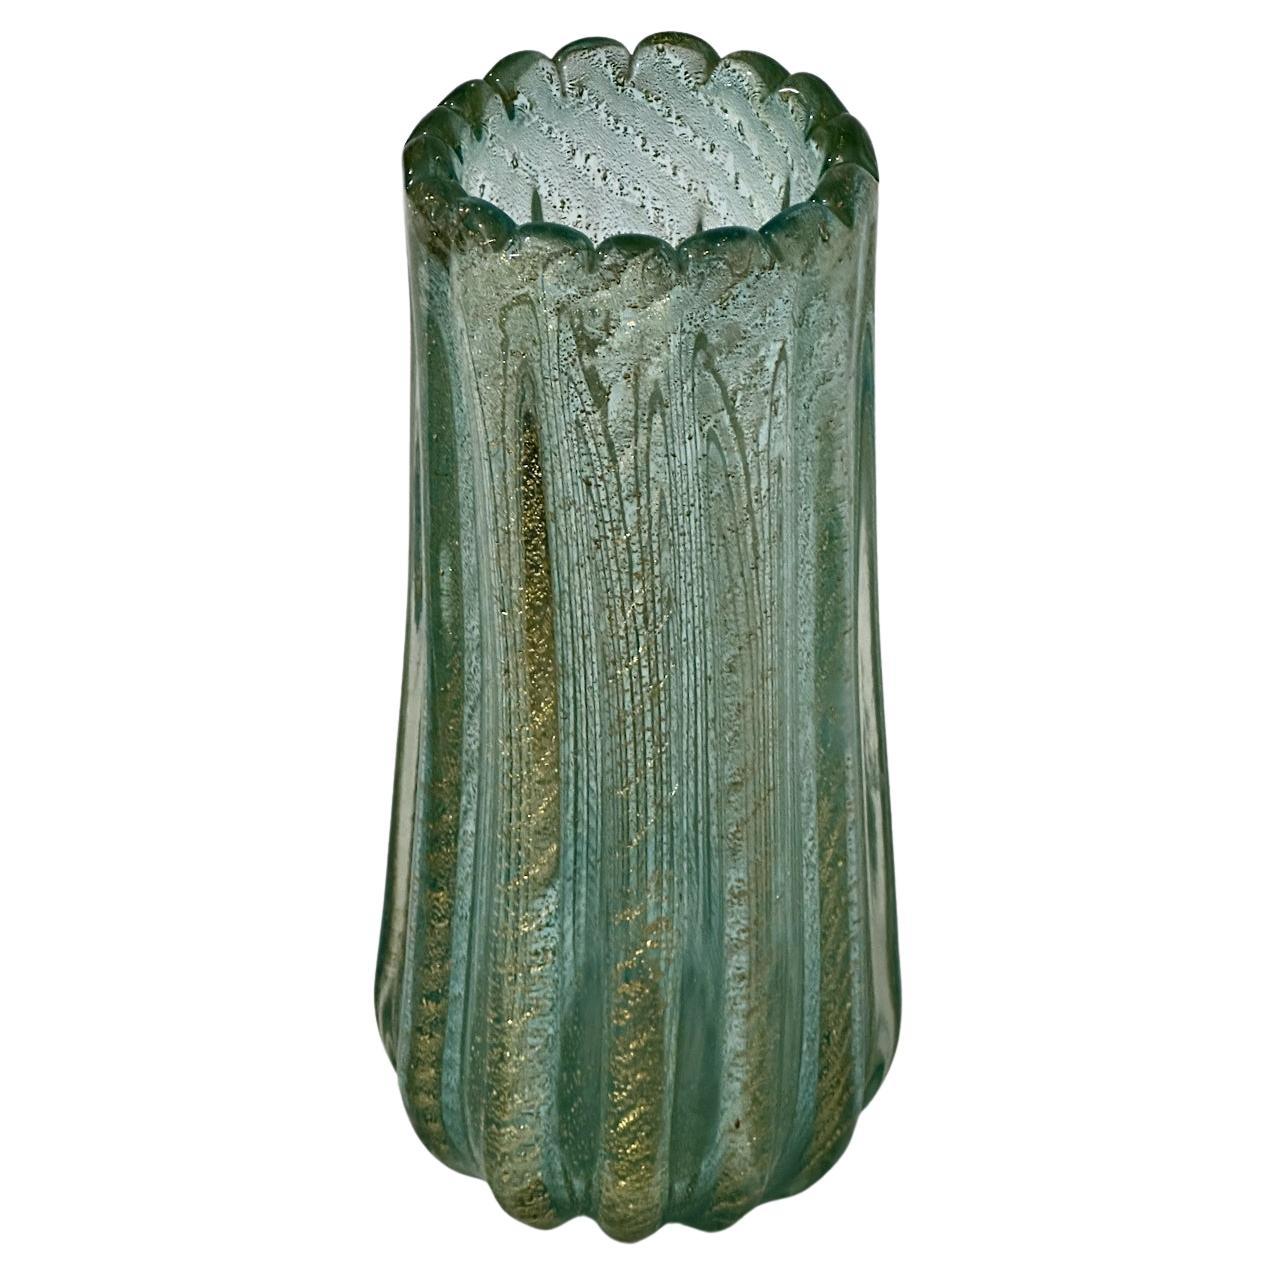 Ercole Barovier & Toso Cordonato d'Or Green and Gold Murano Glass Vase, Circa 1950. Featuring a handcrafted, vertically ribbed form, ruffled rim and hand blown with fused 24 kt gold 